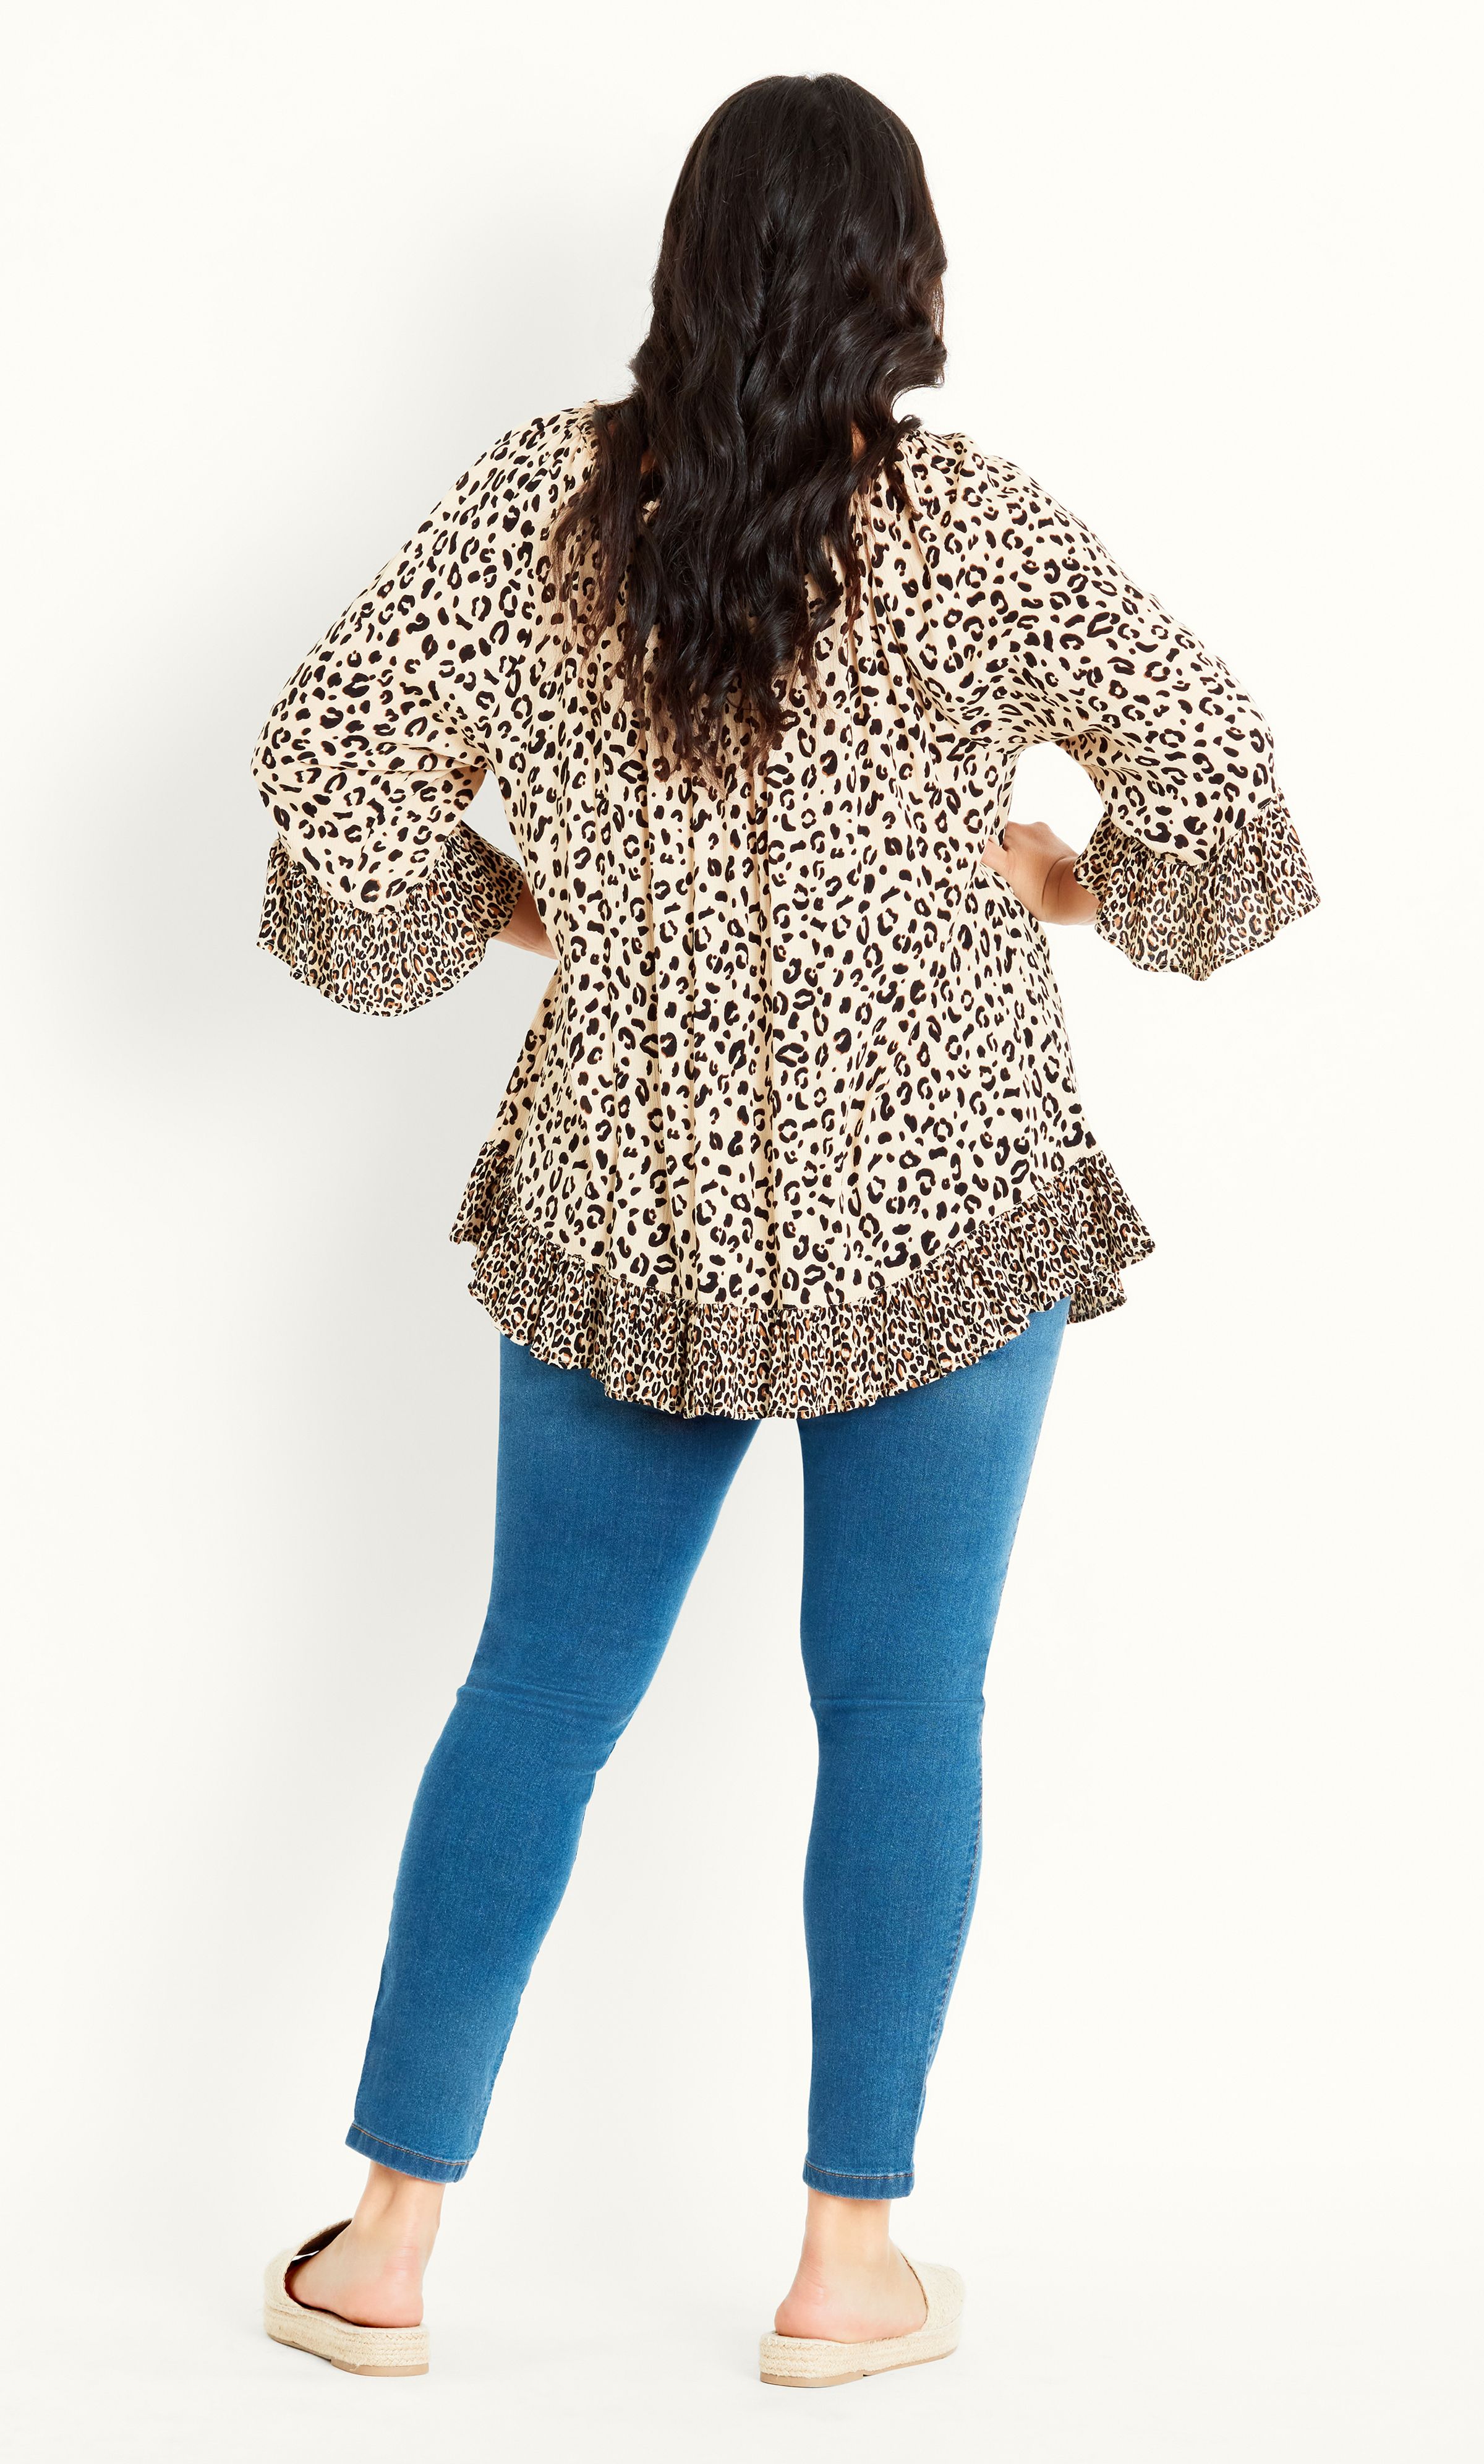 The Leopard Bardot Top breathes life into any wardrobe, offering an eye-catching leopard print that is bound to turn heads. Complete with flirtatious frills and a breezy relaxed fit, this top seamlessly combines effortless style with everyday comfort! Key Features Include: - Elasticated on-off shoulder neckline - 3/4 frilled sleeves - Lightweight non-stretch fabrication - Relaxed fit - Unlined - Pull over style - Hip length - Frilled hemline Team with skinny jeans and wood-stacked heels for a chic brunch look!